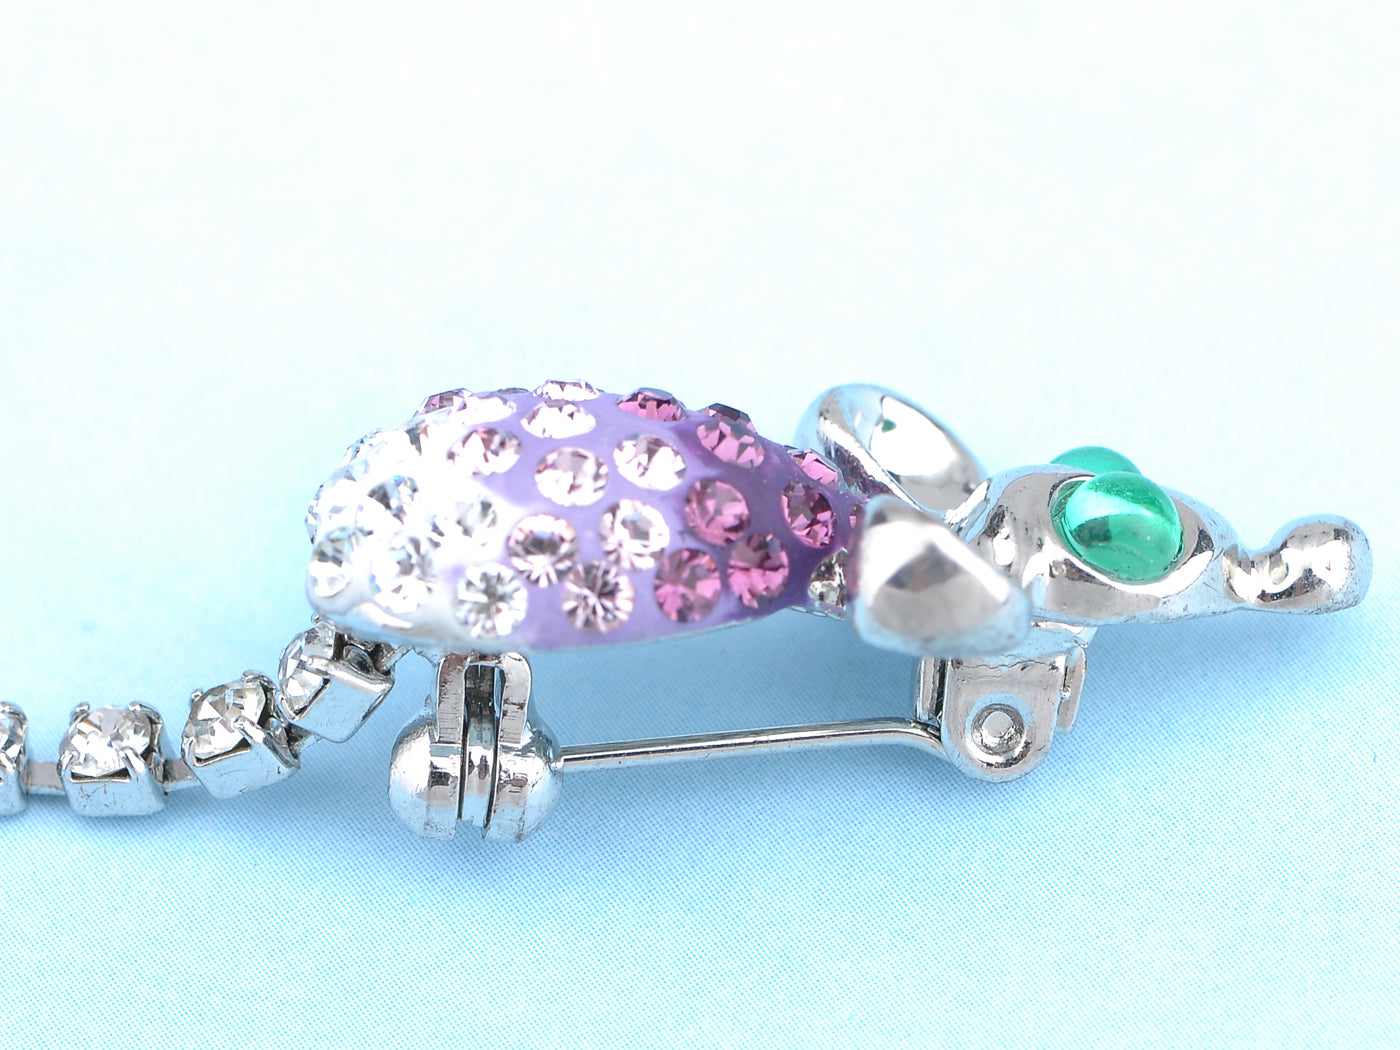 Colored Rat Mouse Curly Tail Brooch Pin